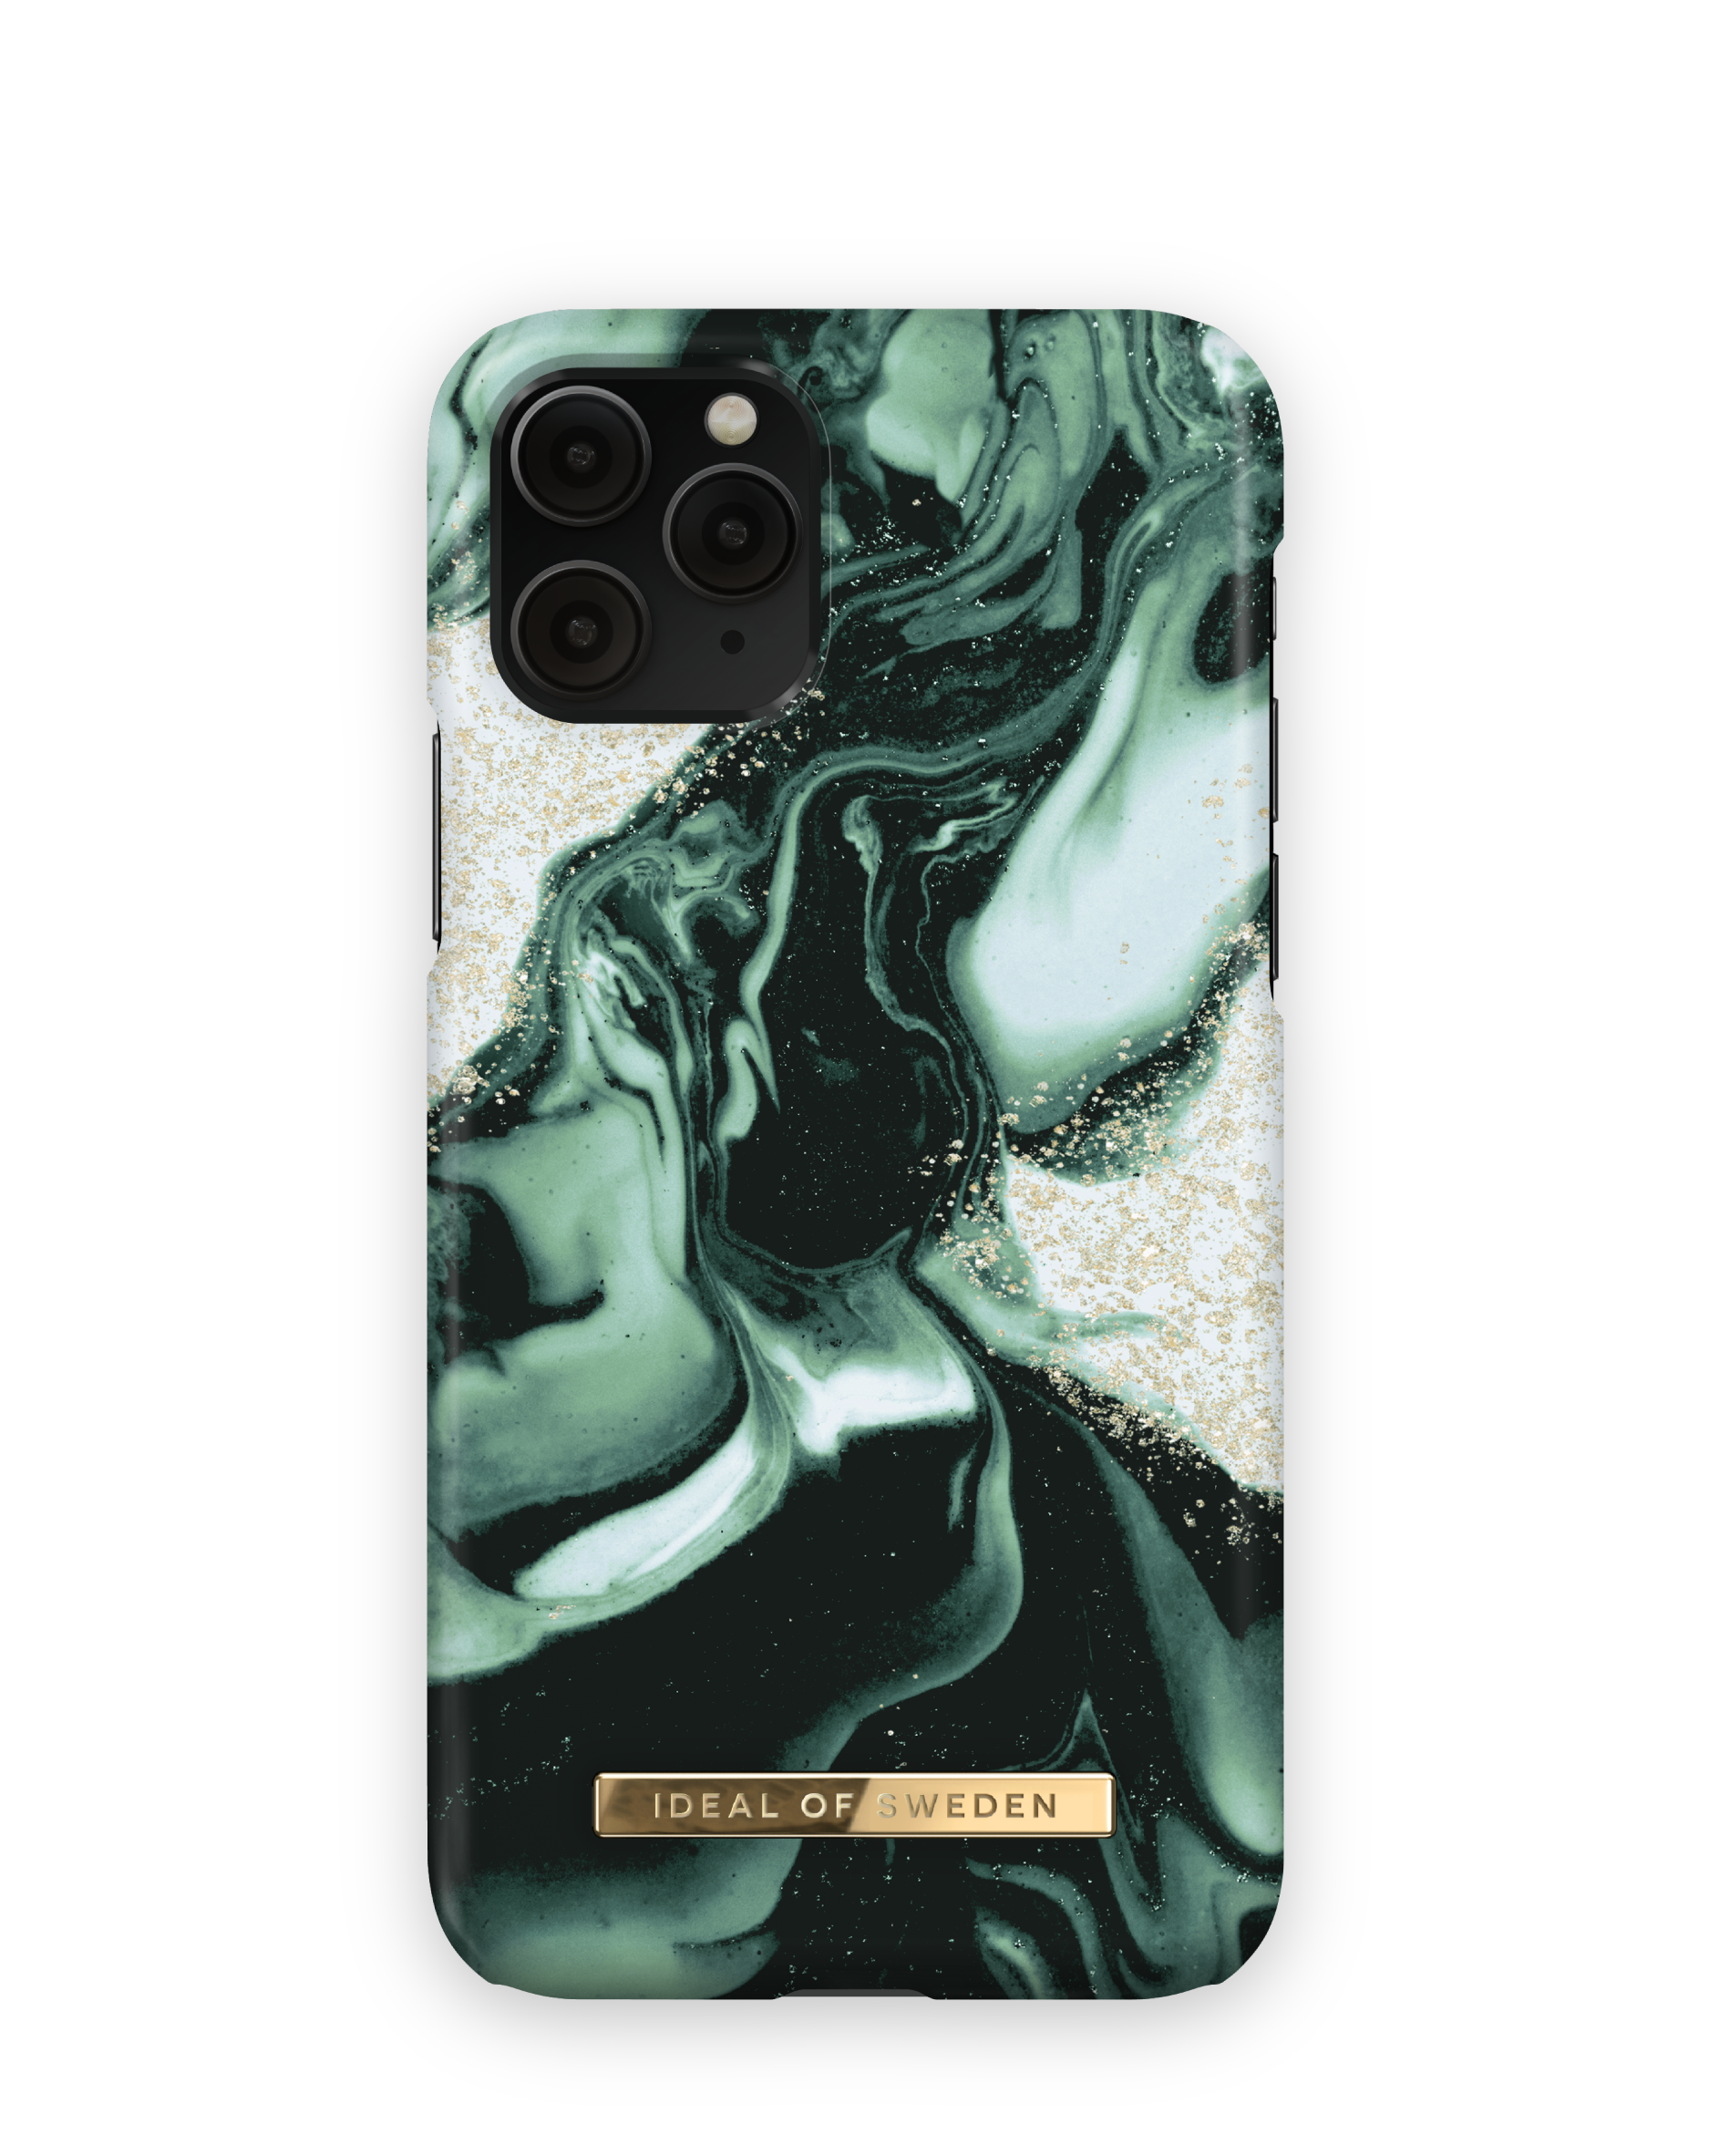 Backcover, IDEAL iPhone OF SWEDEN Olive 11 Golden Apple, IDFCAW21-I1958-320, Pro/XS/X, Marble